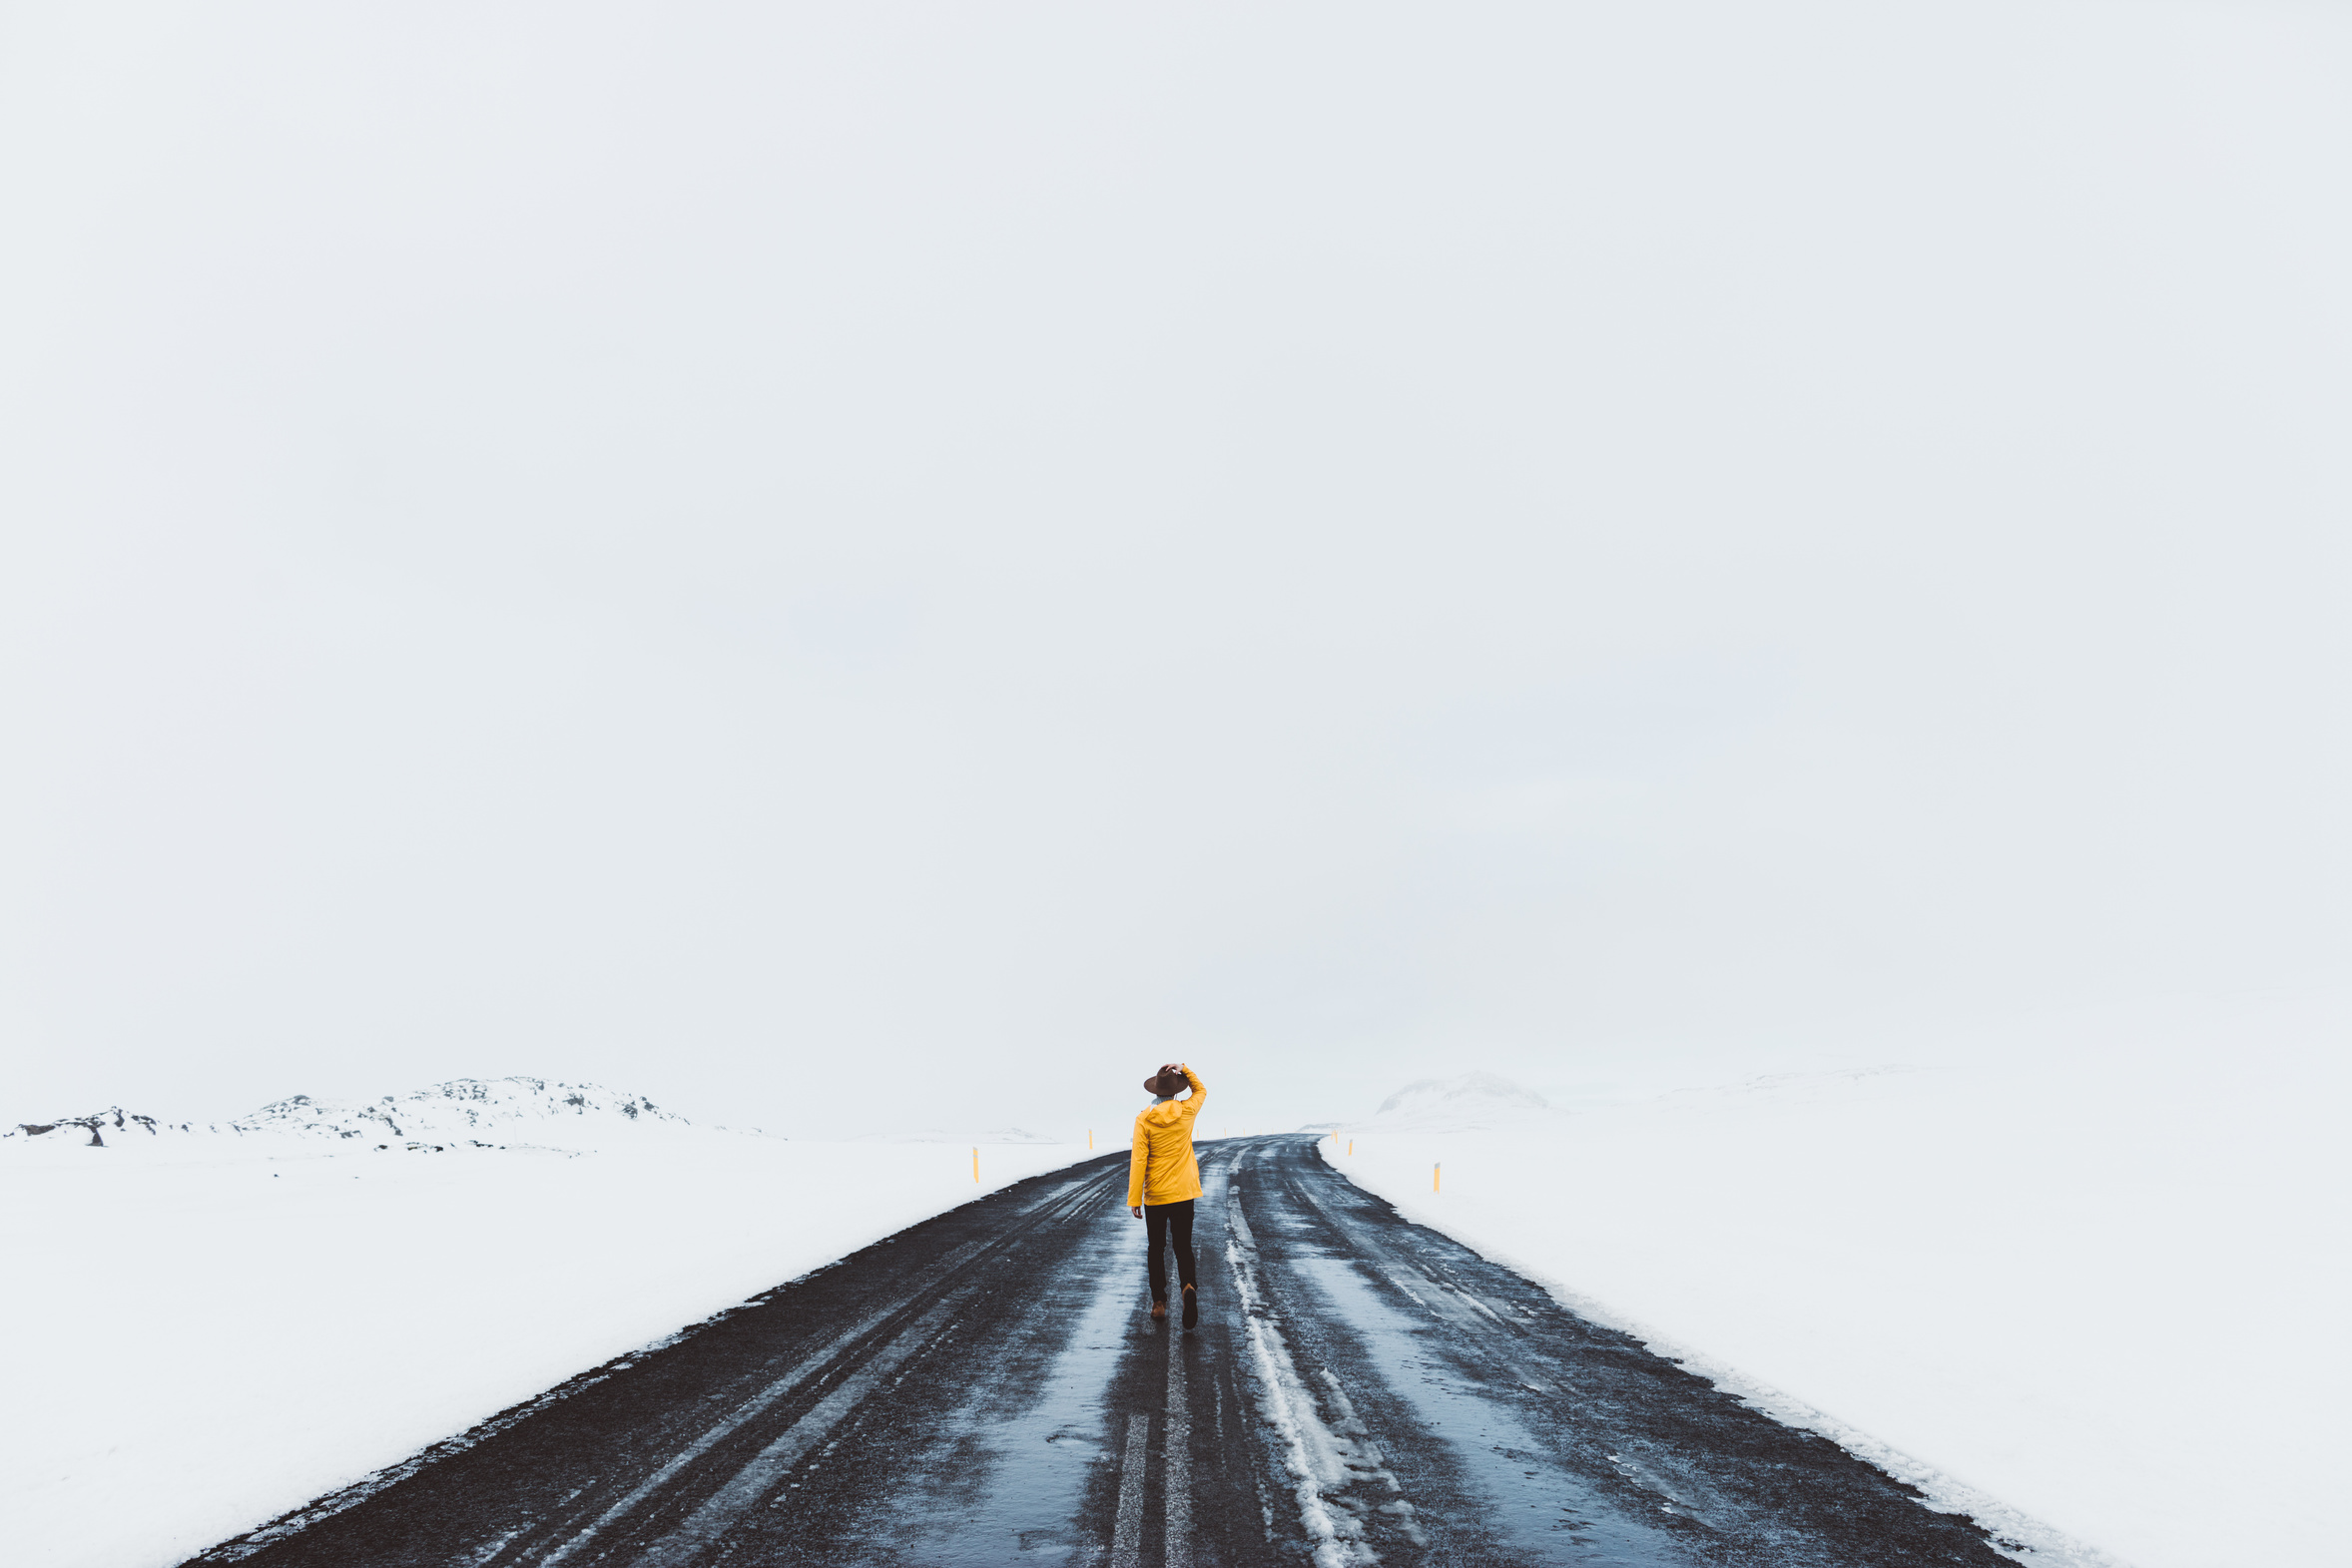 Rear view of man standing in road on snow covered landscape